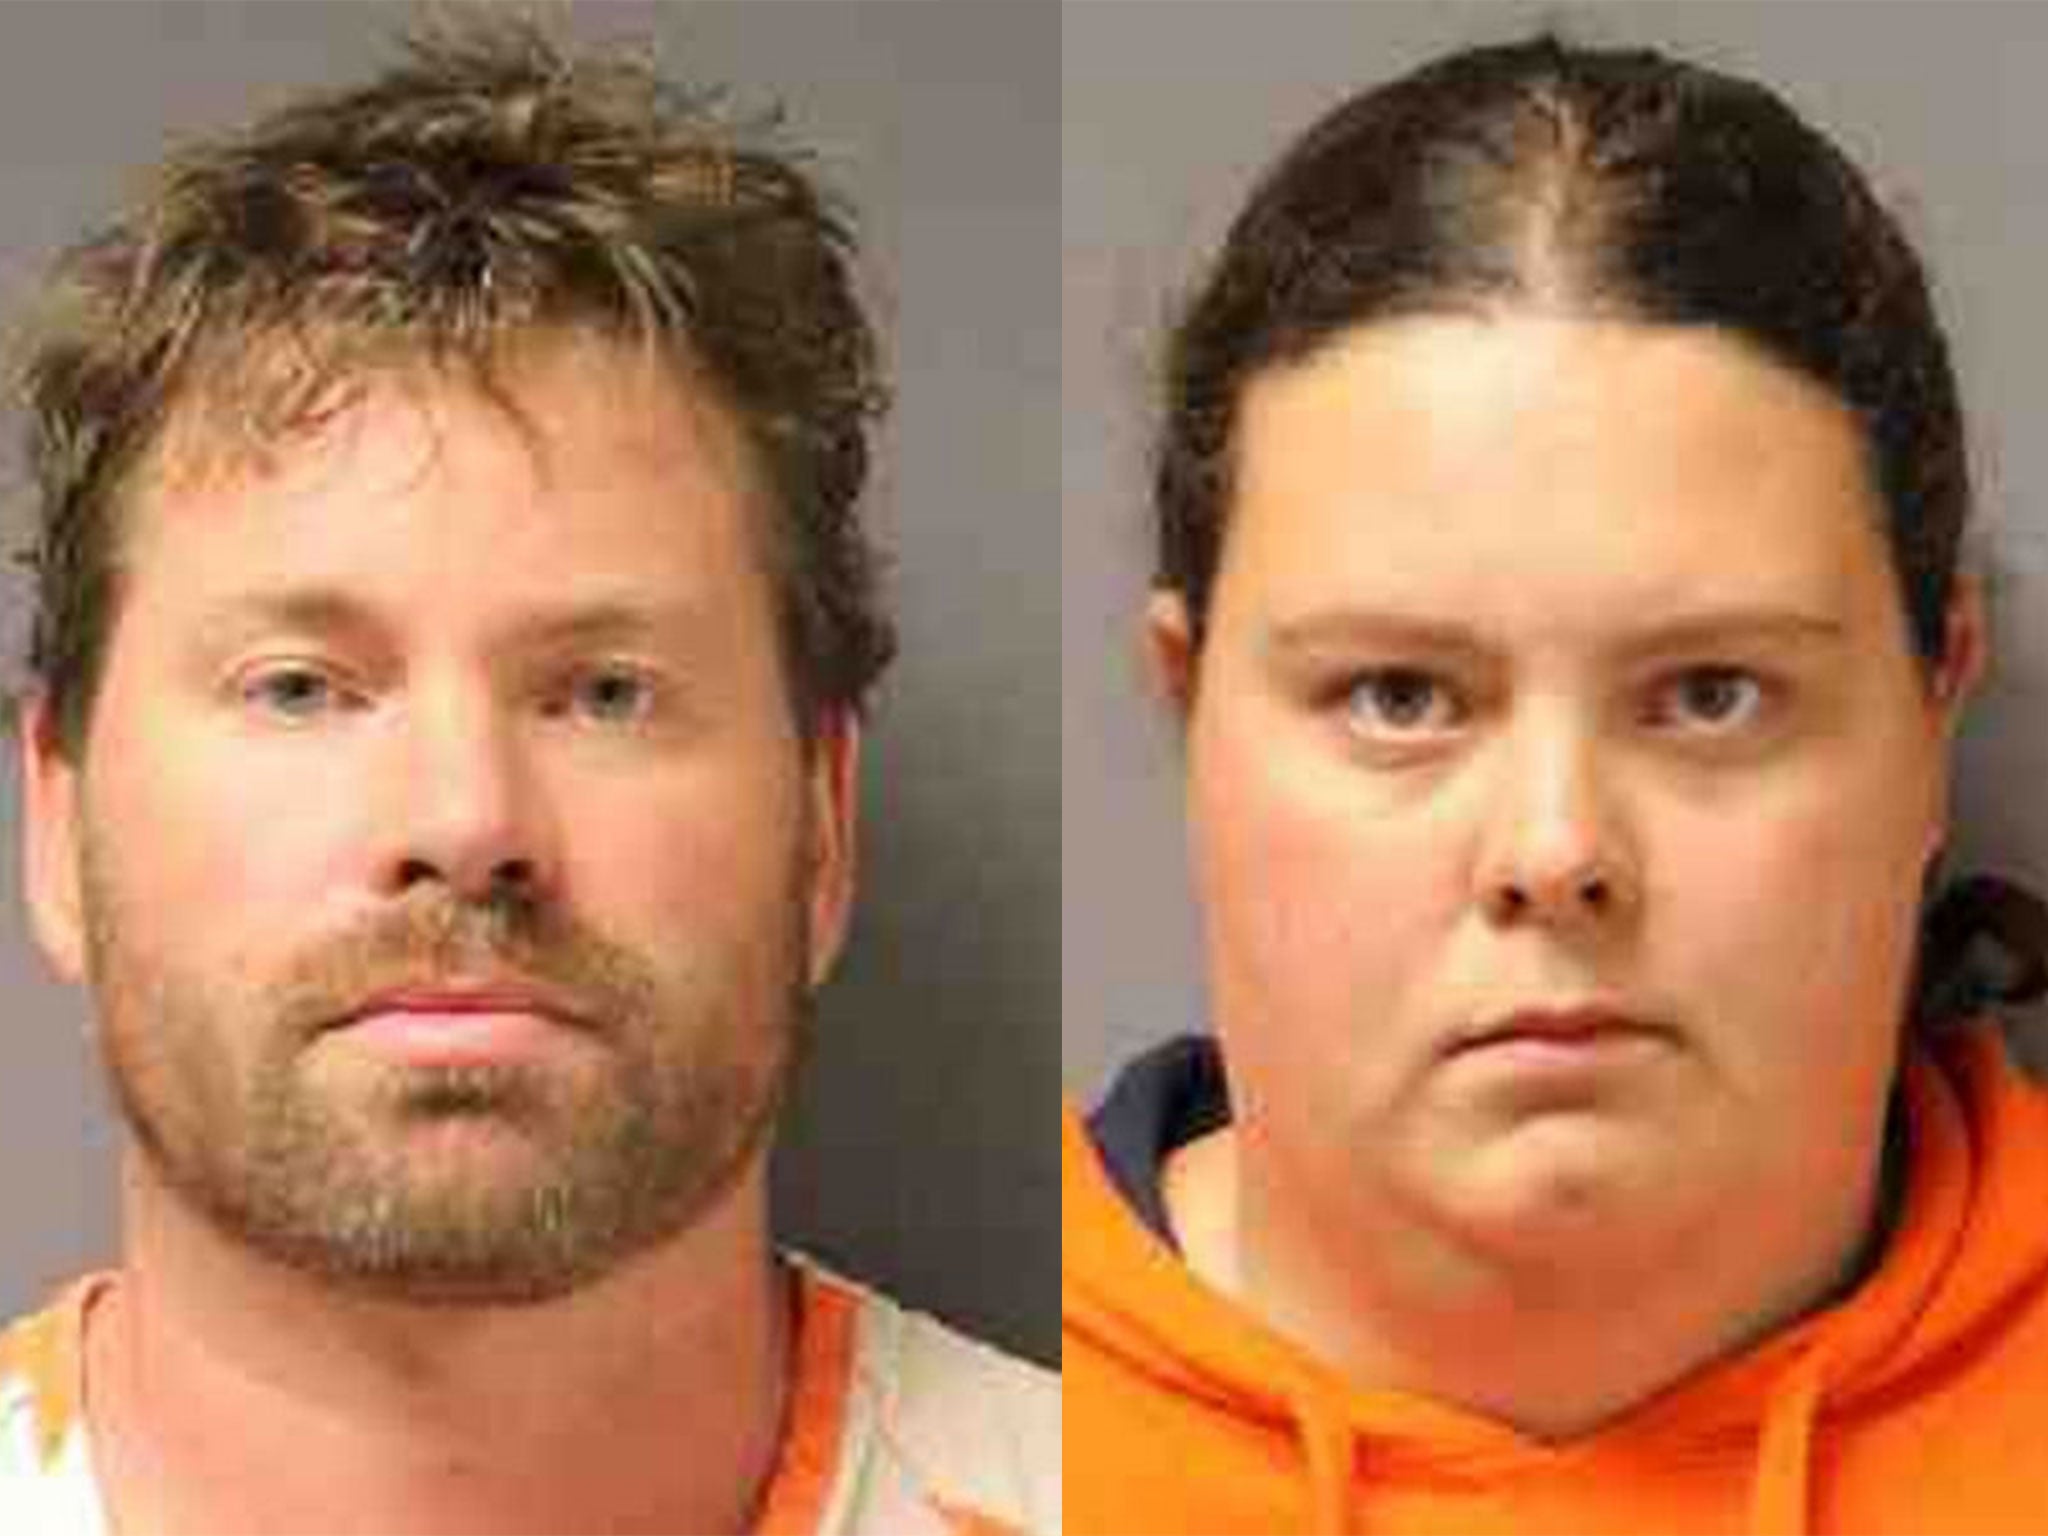 Stephen Howells II, 39, Nicole Vaisey, 25, were taken into custody in connection with the kidnapping of two young Amish sisters from their family farm stand near New York's border with Canada, the county district attorney said on Friday.